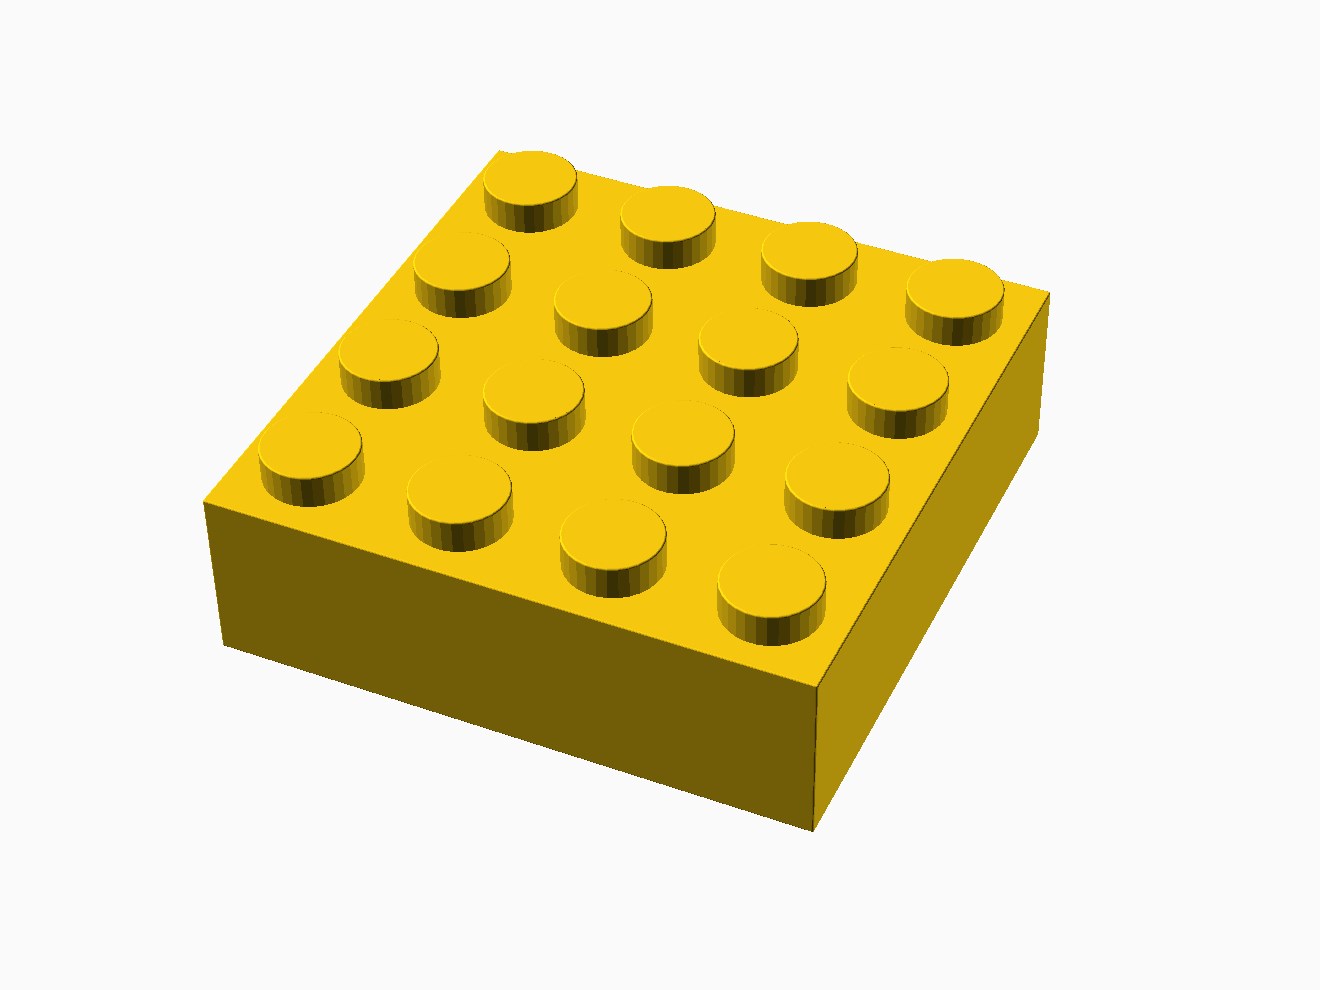 3D printable model of a LEGO 4x4 Brick with standard knobs.